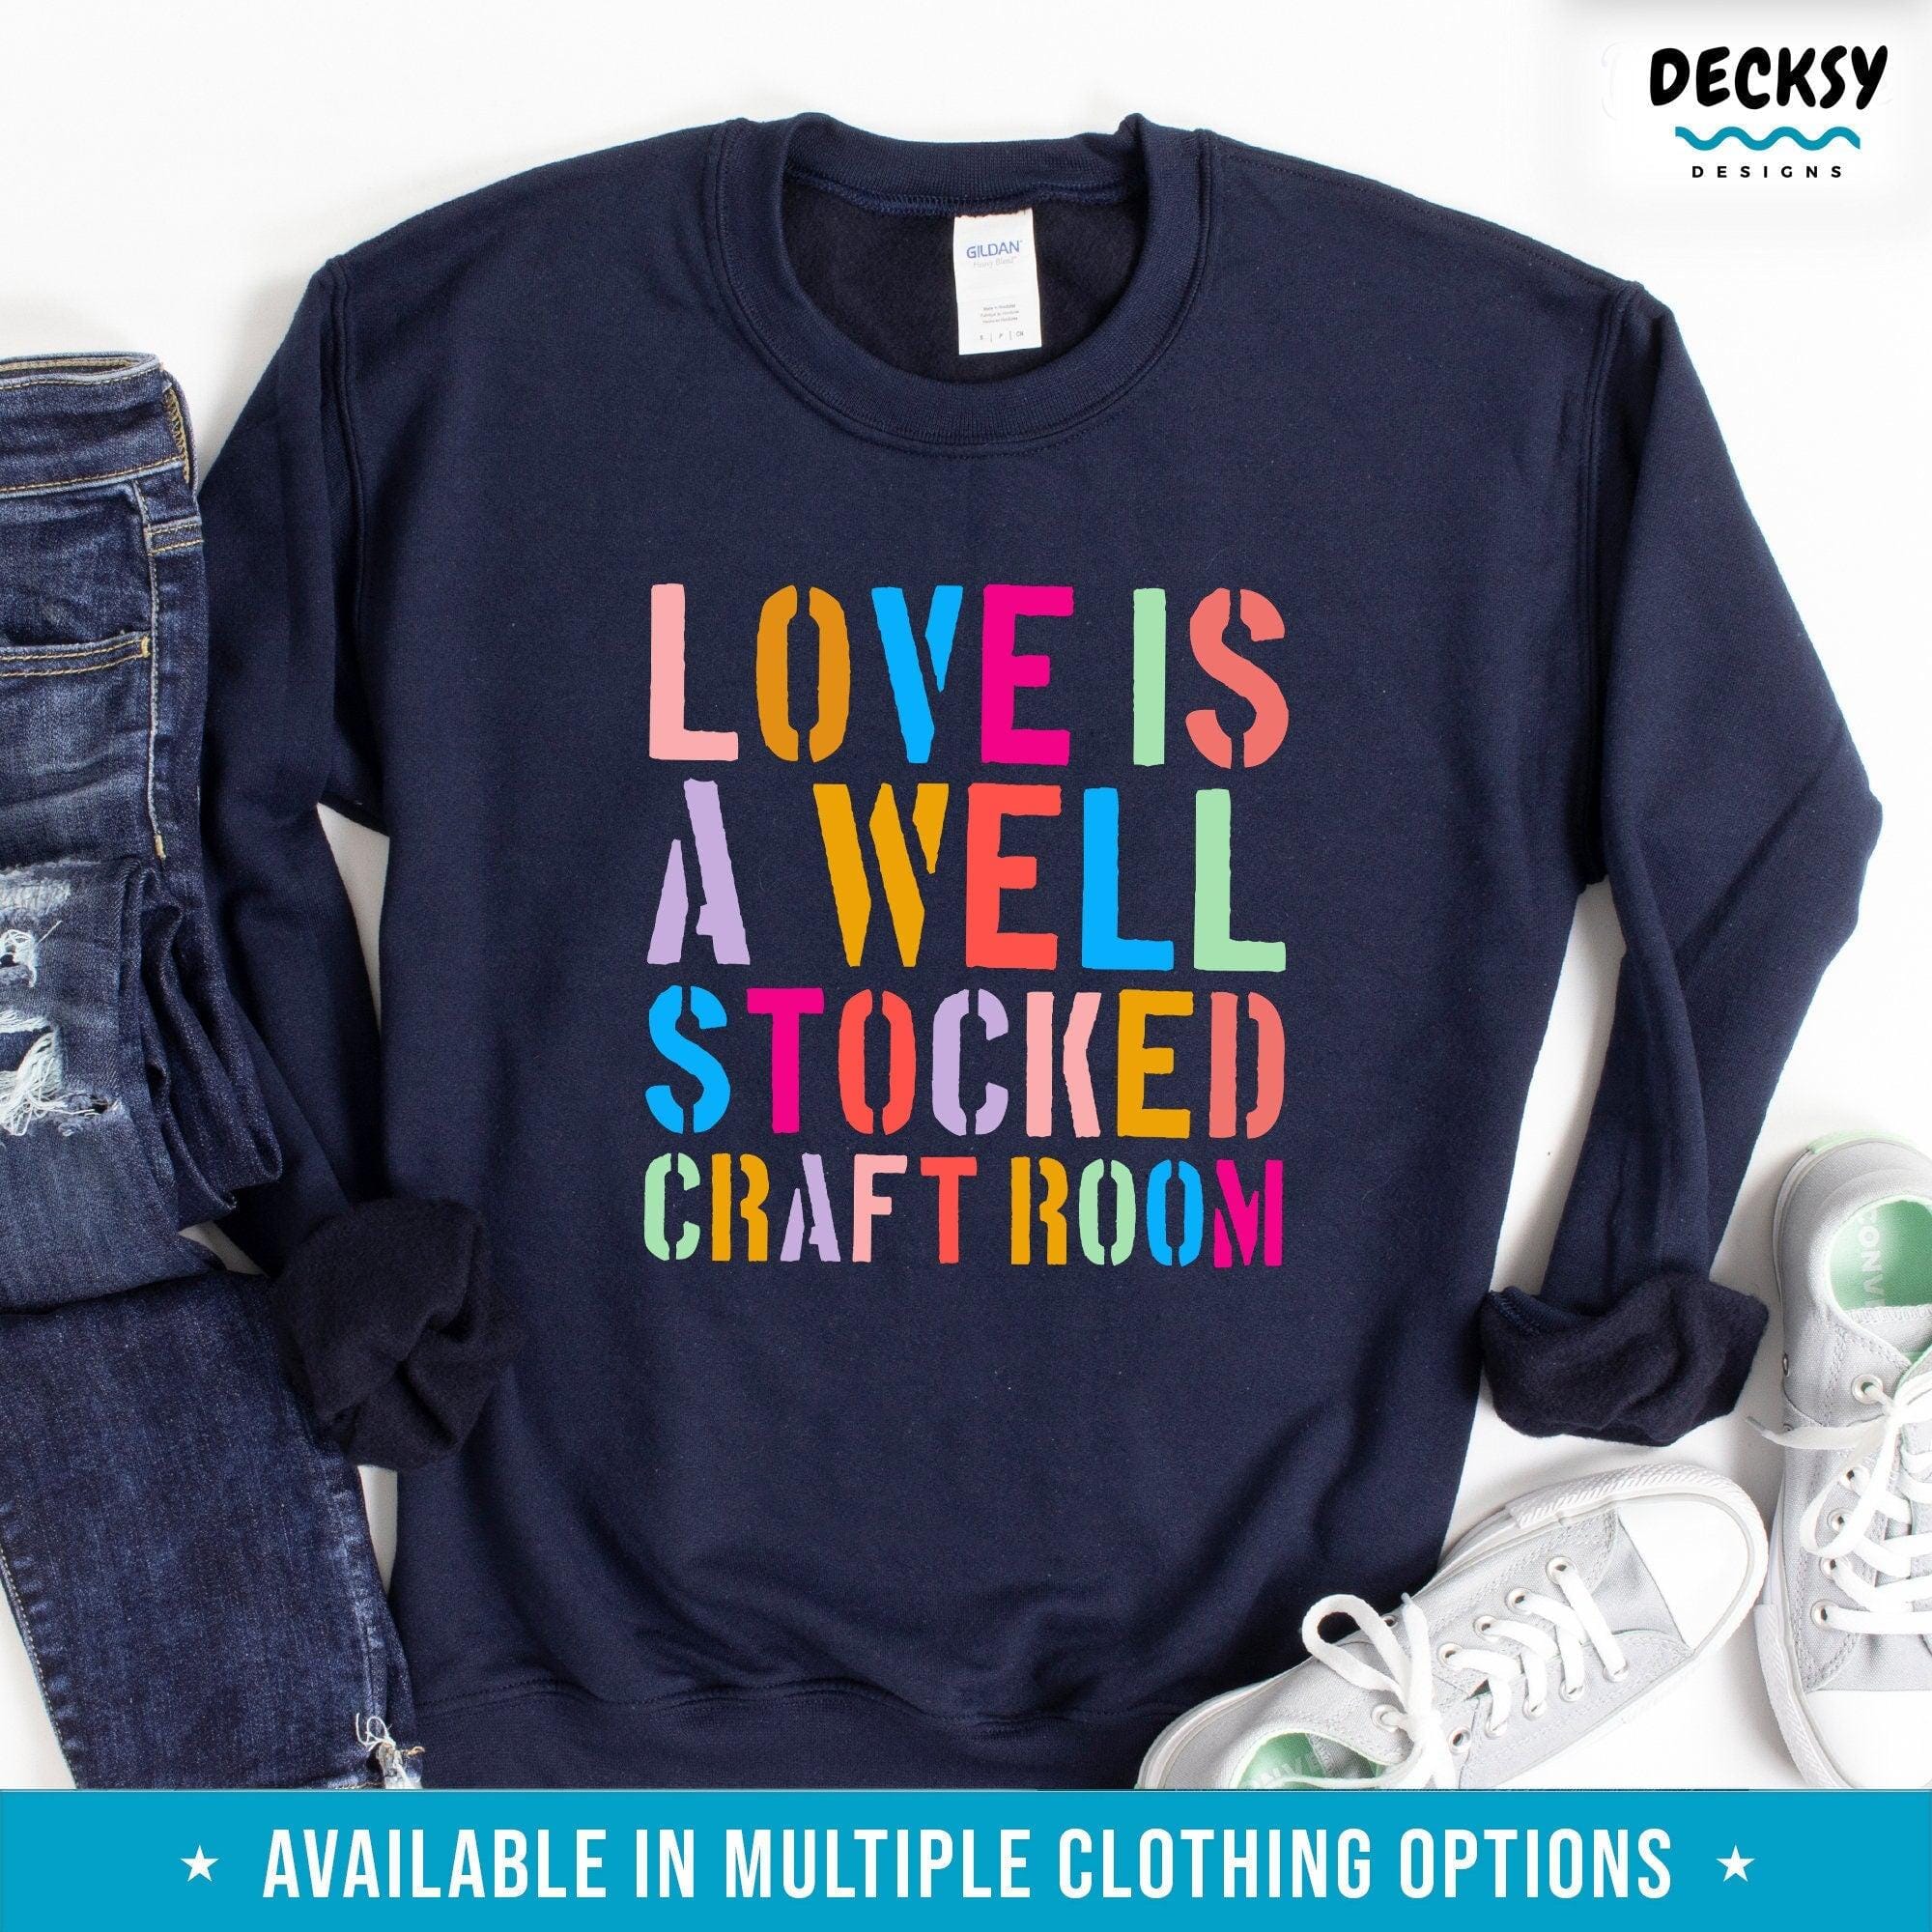 Artist Shirt, Gifts For Crafters-Clothing:Gender-Neutral Adult Clothing:Tops & Tees:T-shirts:Graphic Tees-DecksyDesigns